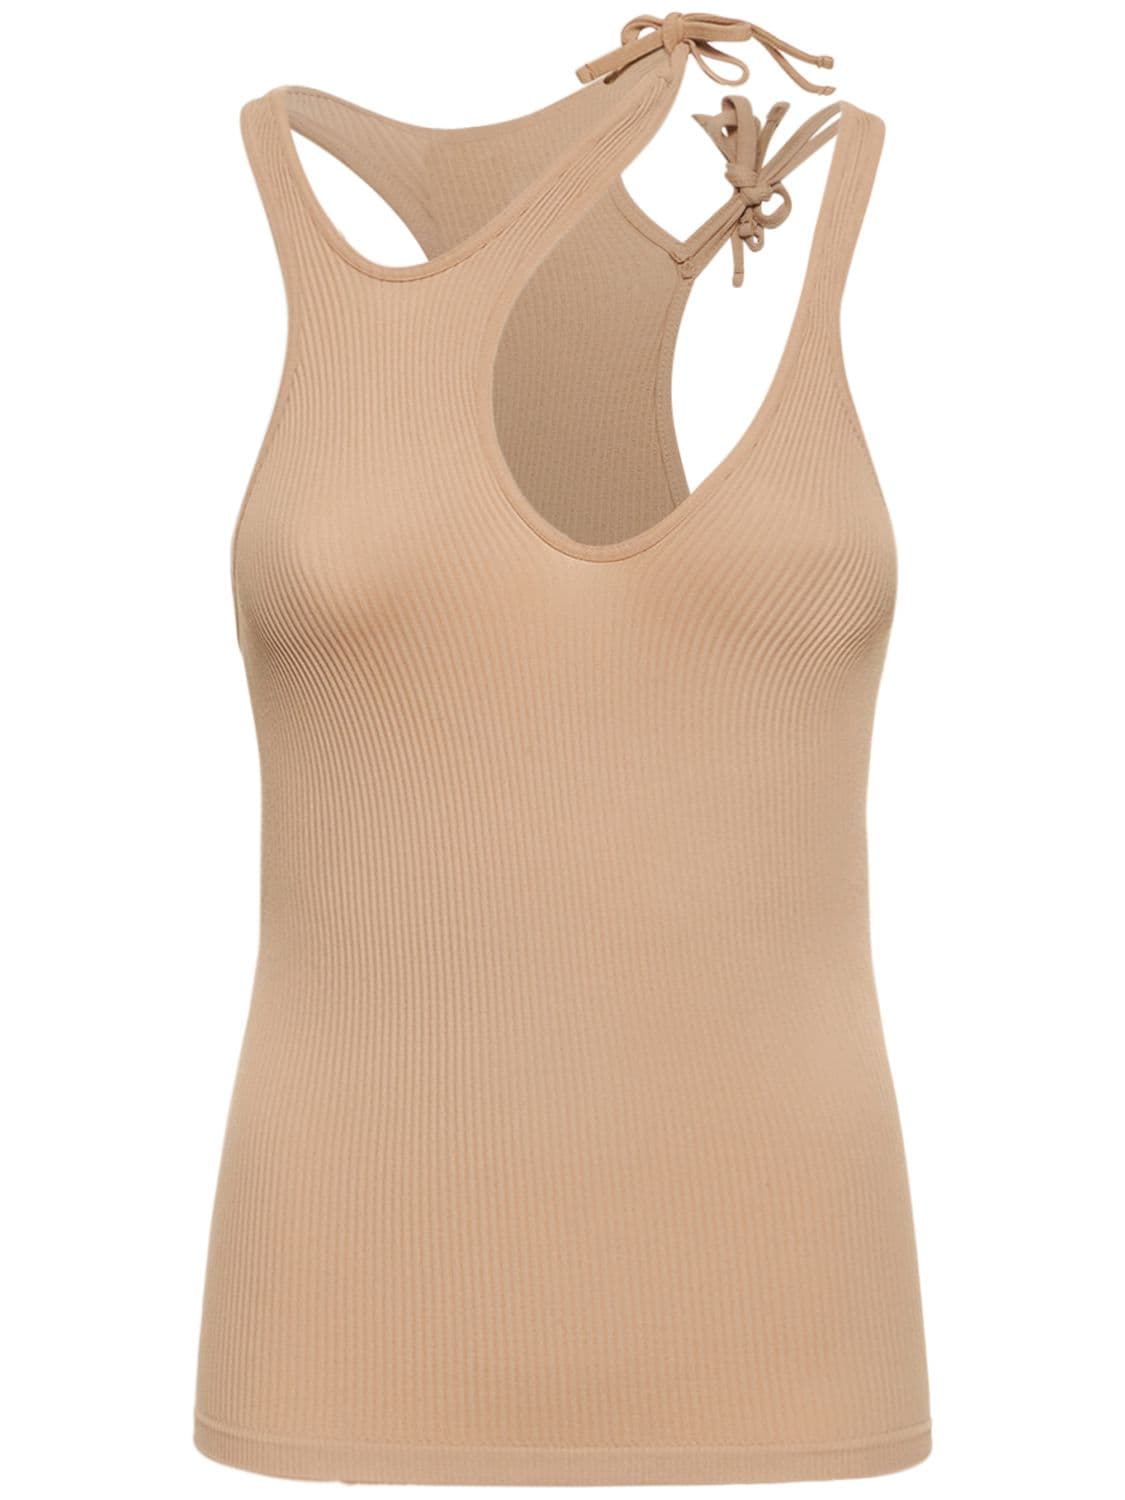 Andreädamo Ribbed Jersey Top W/ Double Straps In Nude 001